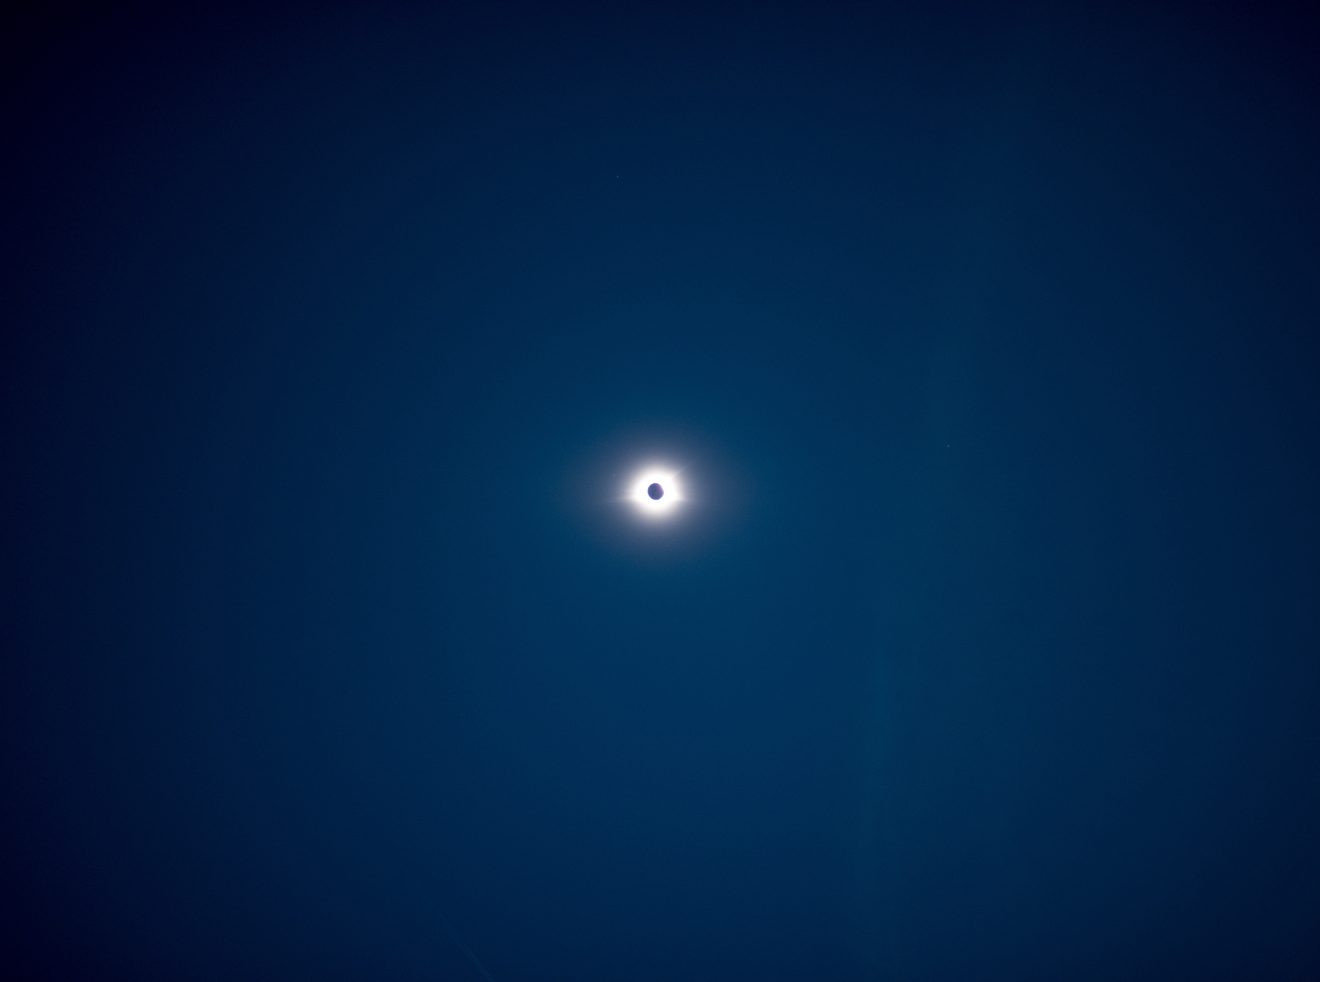 Directly following totality, a "diamond ring" formation is seen.